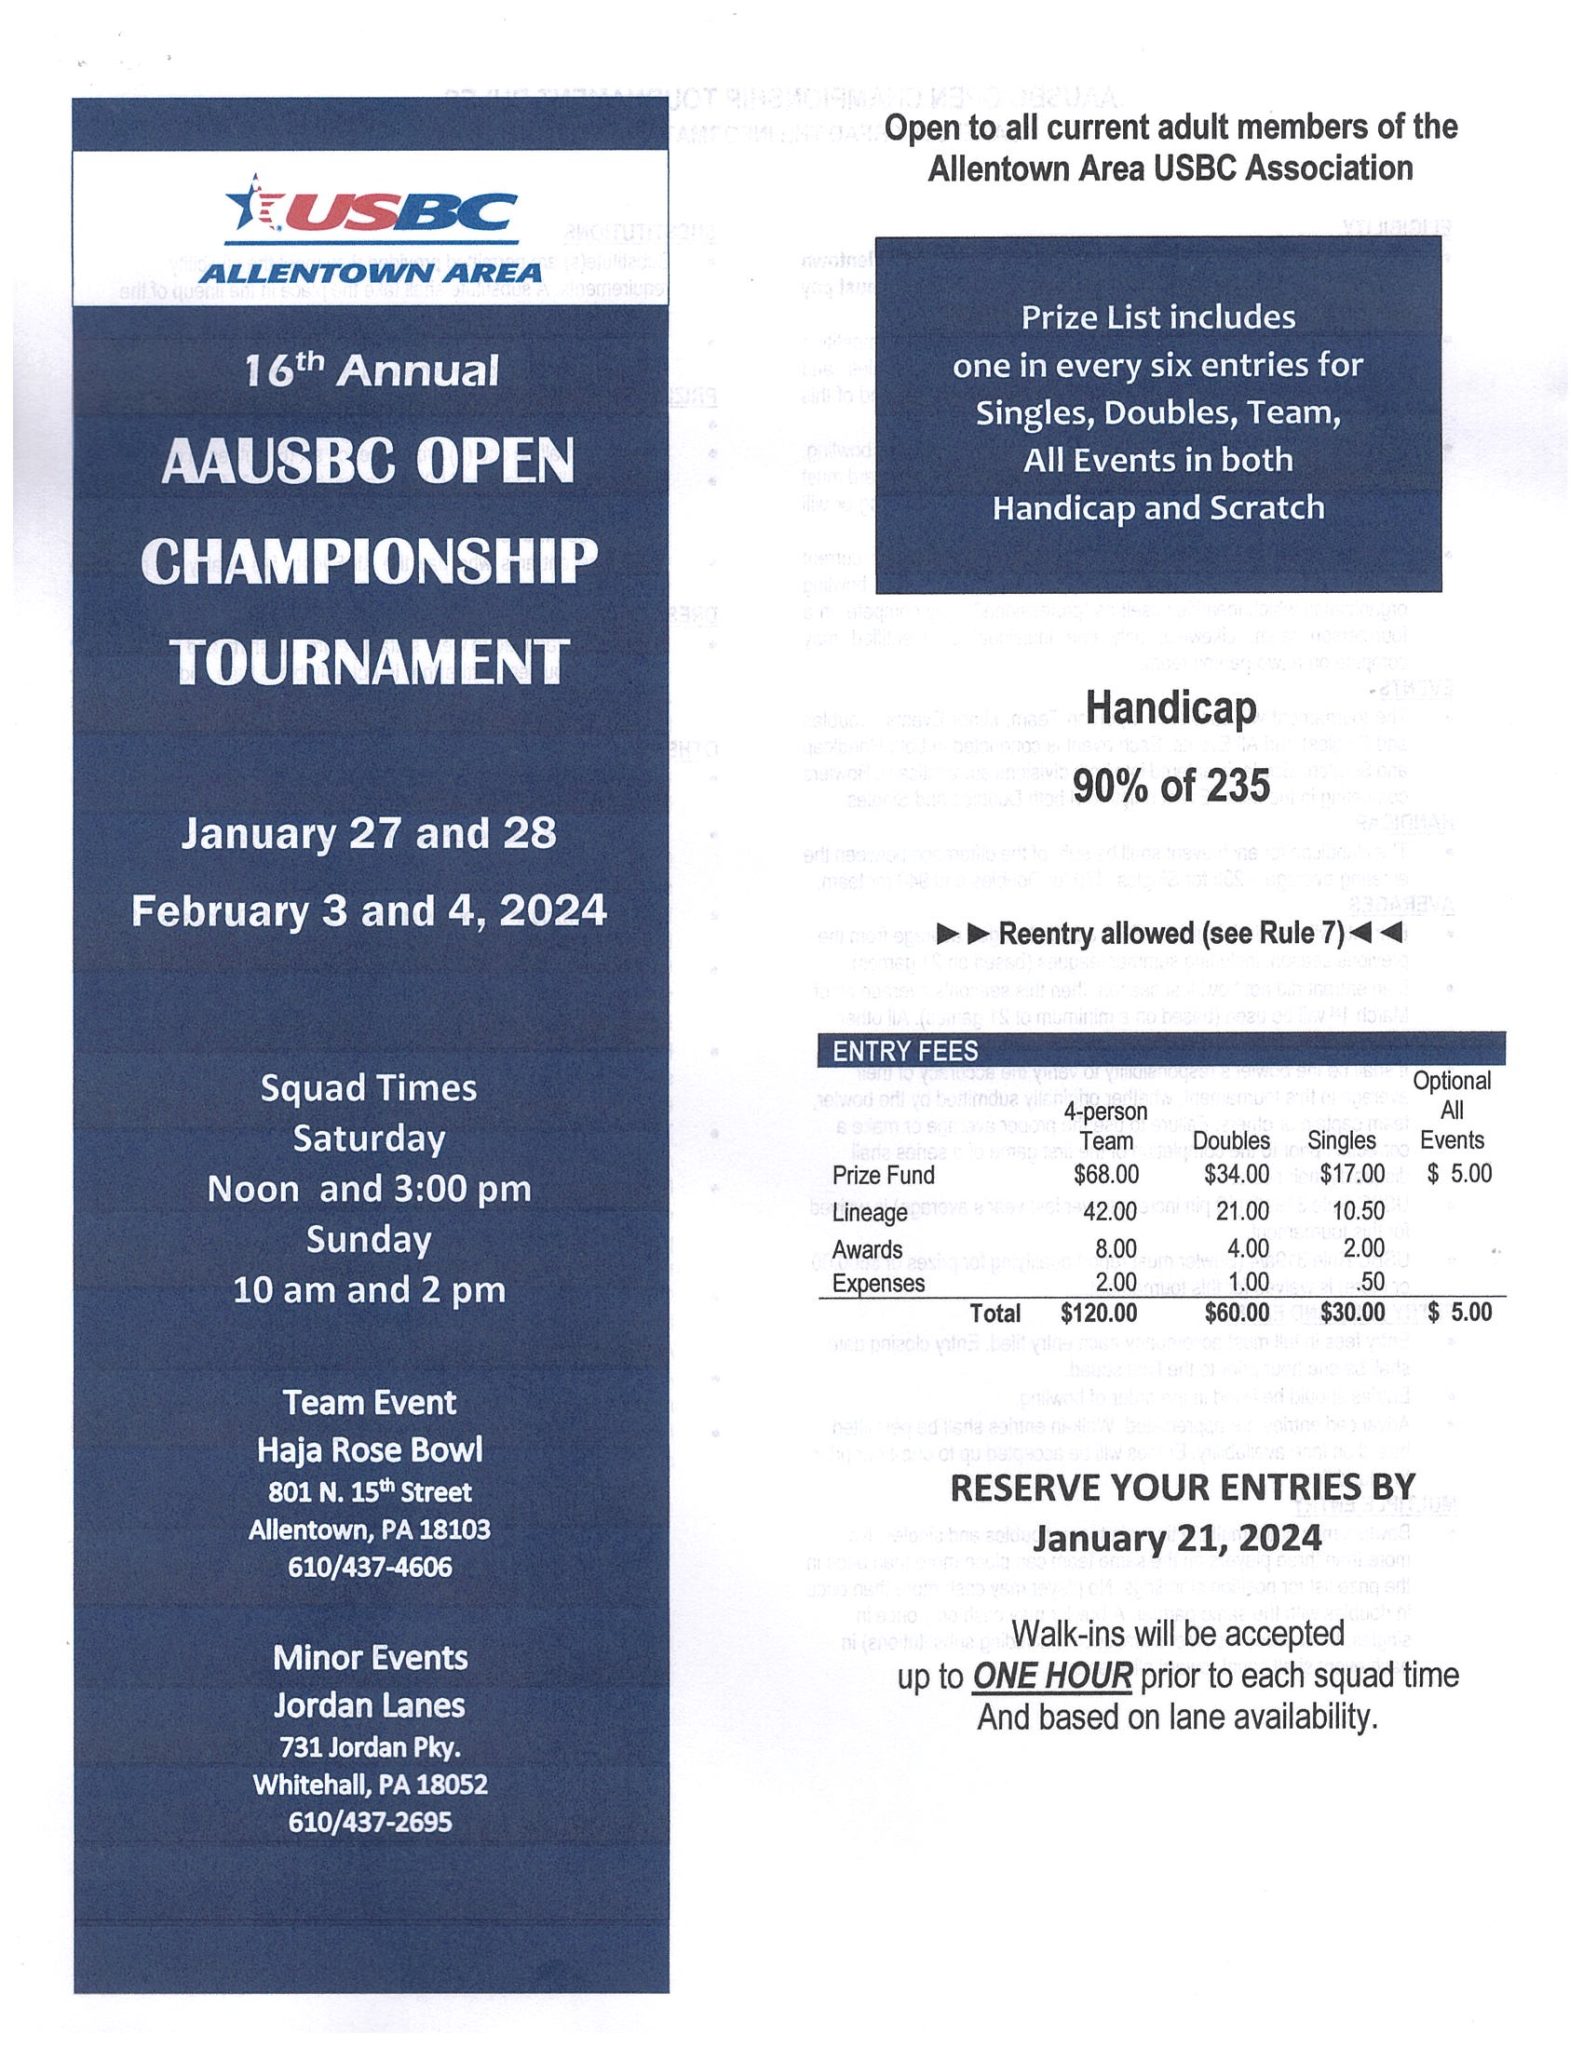 16th Annual AAUSBC Open Championship Tournament 10